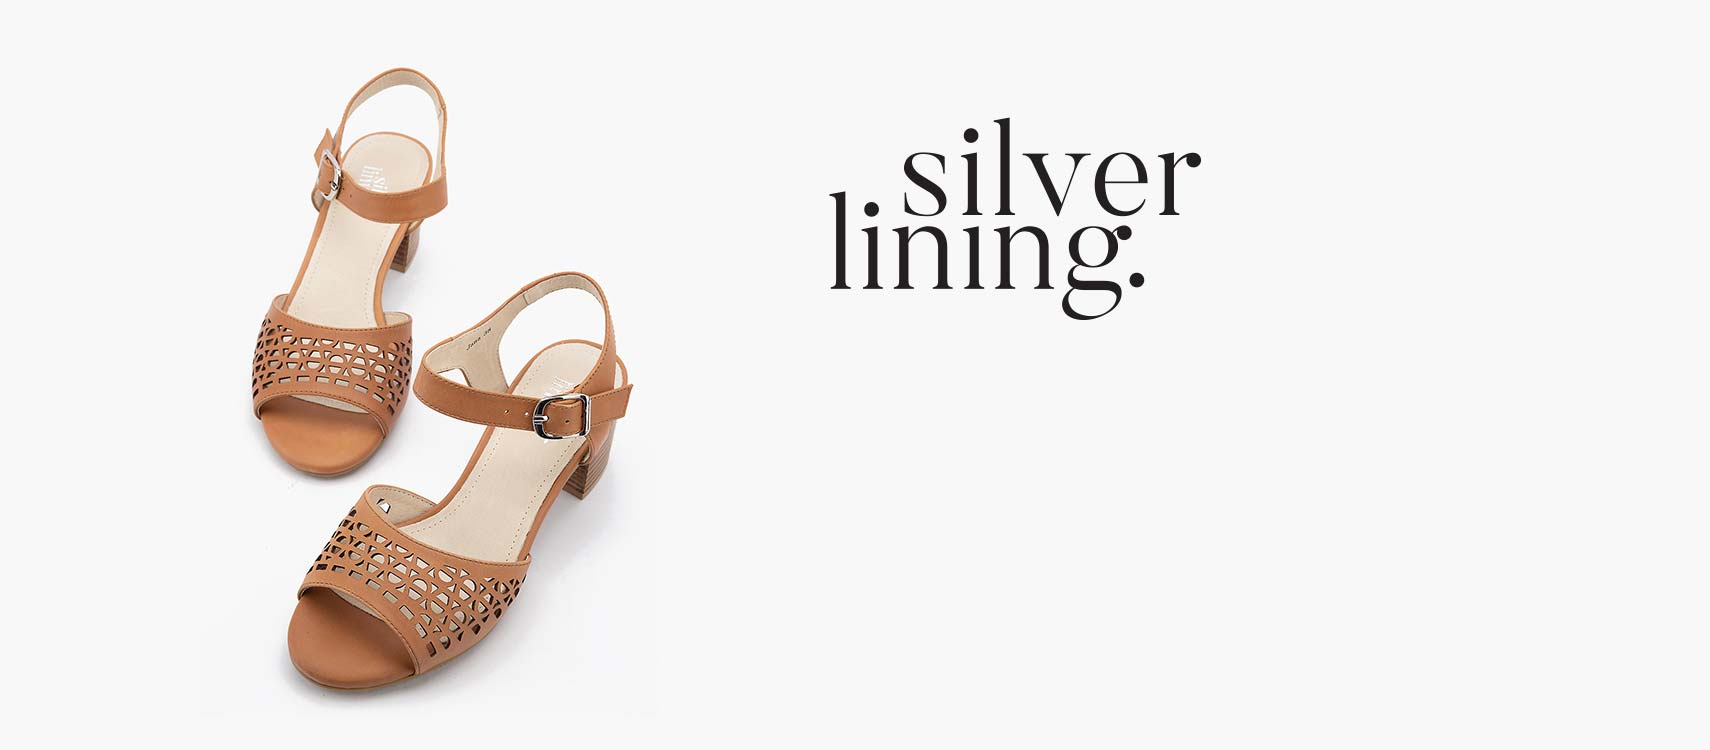 klouds silver lining shoes